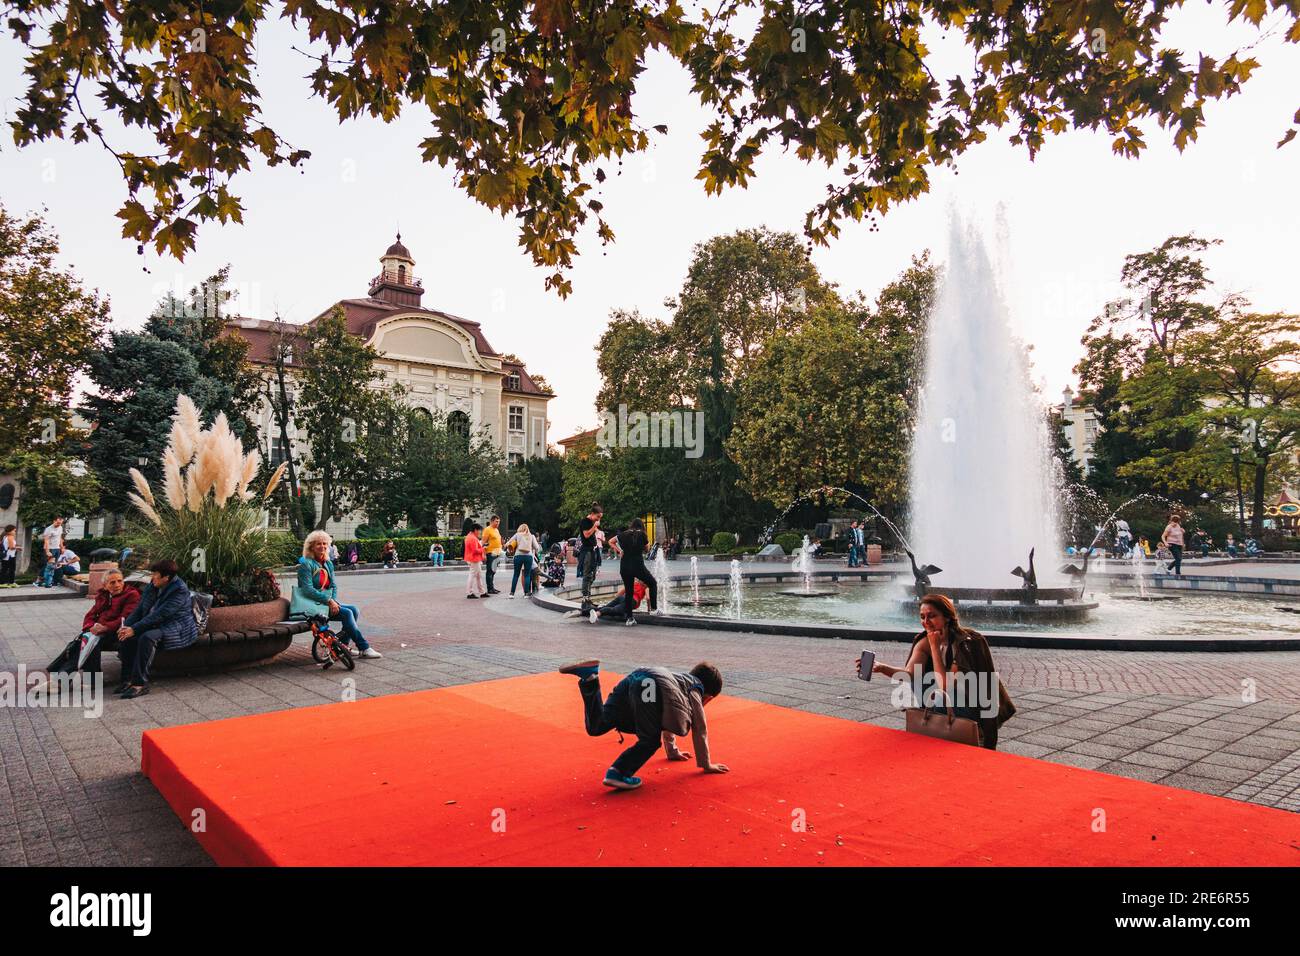 a kid plays on a red platform next to a fountain in the main street of Plovdiv, Bulgaria Stock Photo